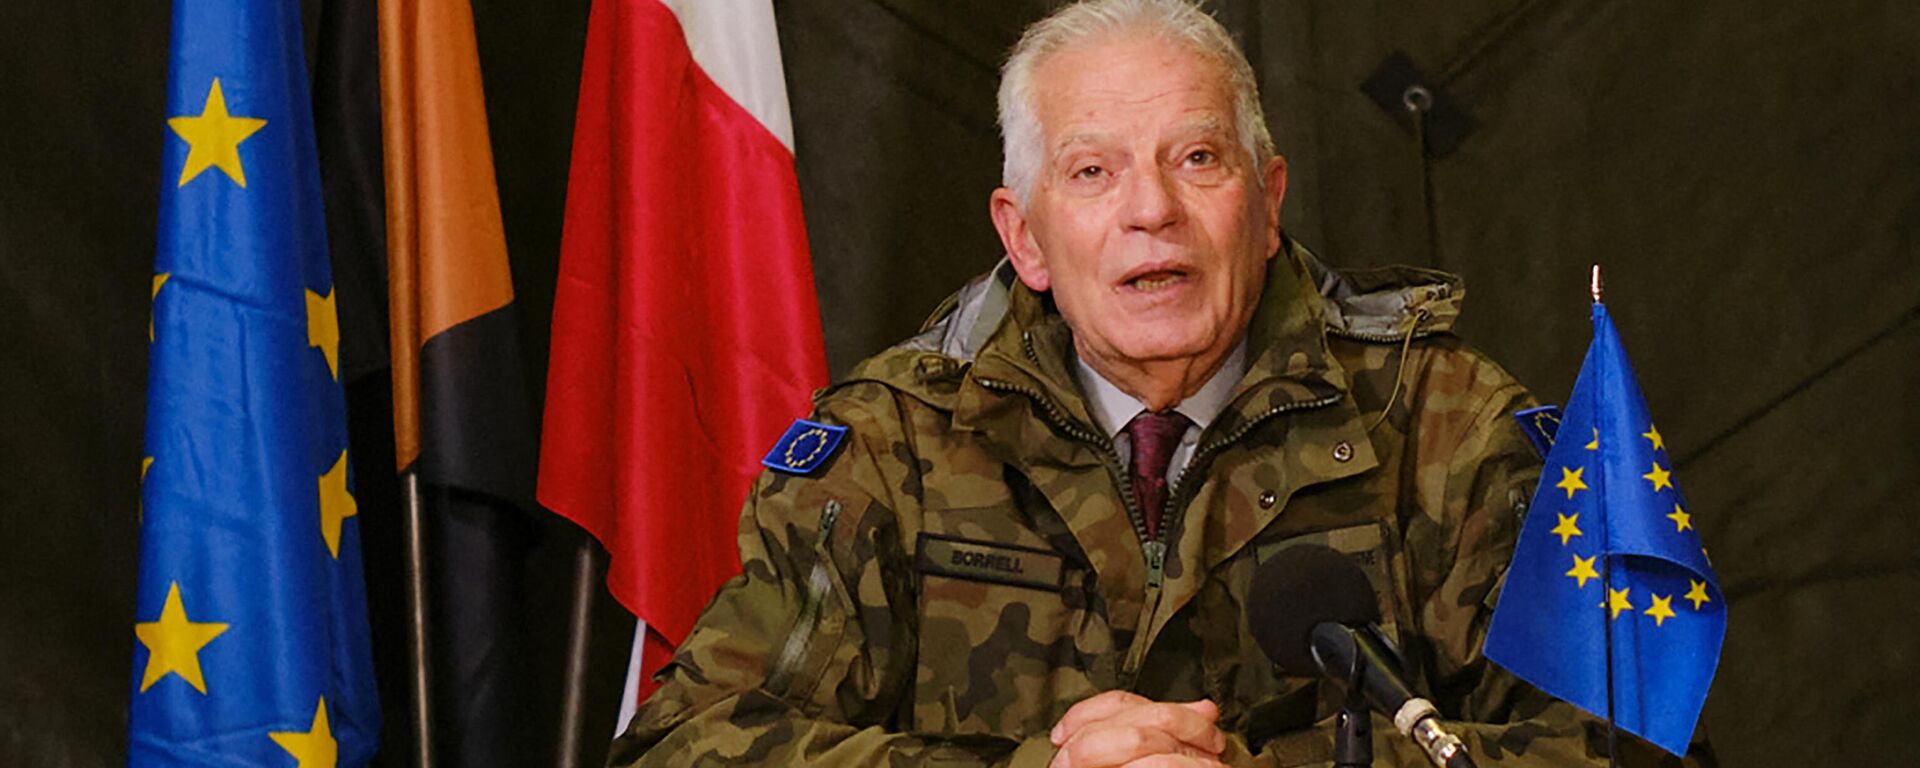 EU High Representative for Foreign Affairs and Security Policy Josep Borrell speaks during a press briefing at the EUMAM training mission centre, where soldiers of the Ukrainian armed forces are trained by EU armed forces, near Brzeg, Poland on December 2, 2022. - Sputnik International, 1920, 11.12.2022